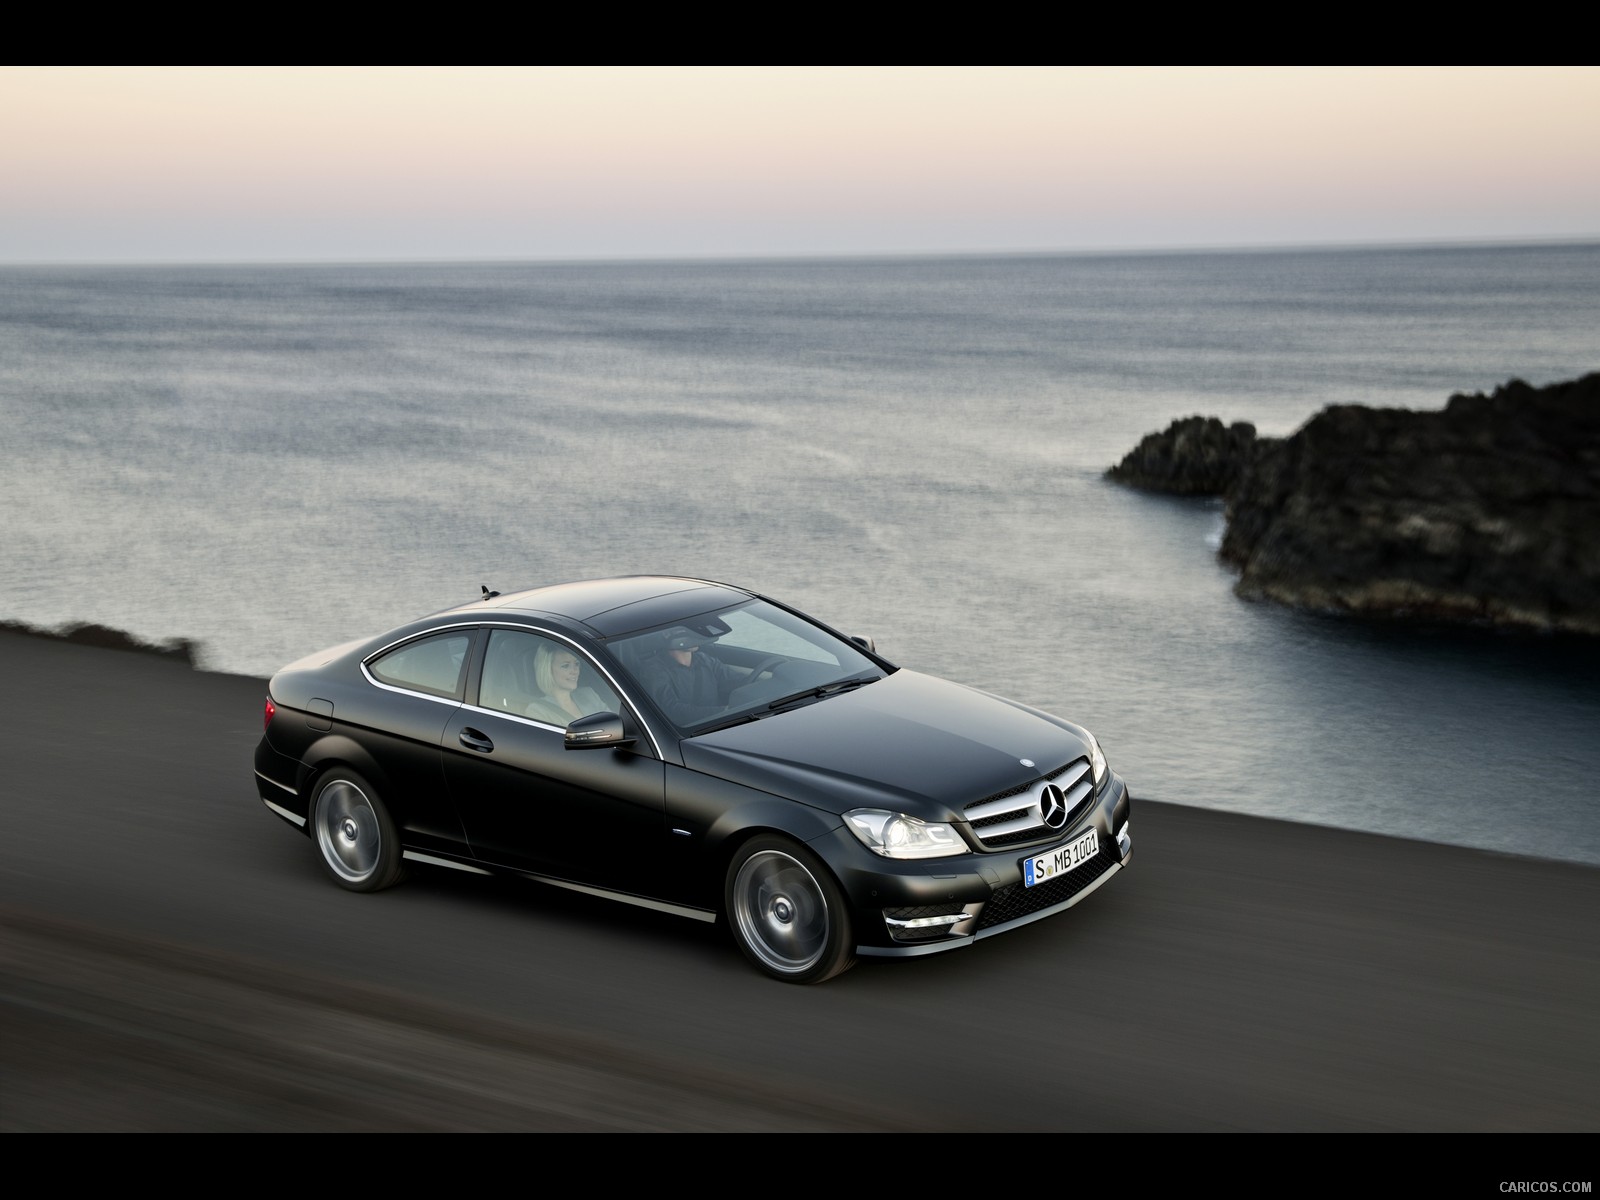 Mercedes-Benz C-Class Coupe (2012)  - Top, #14 of 79